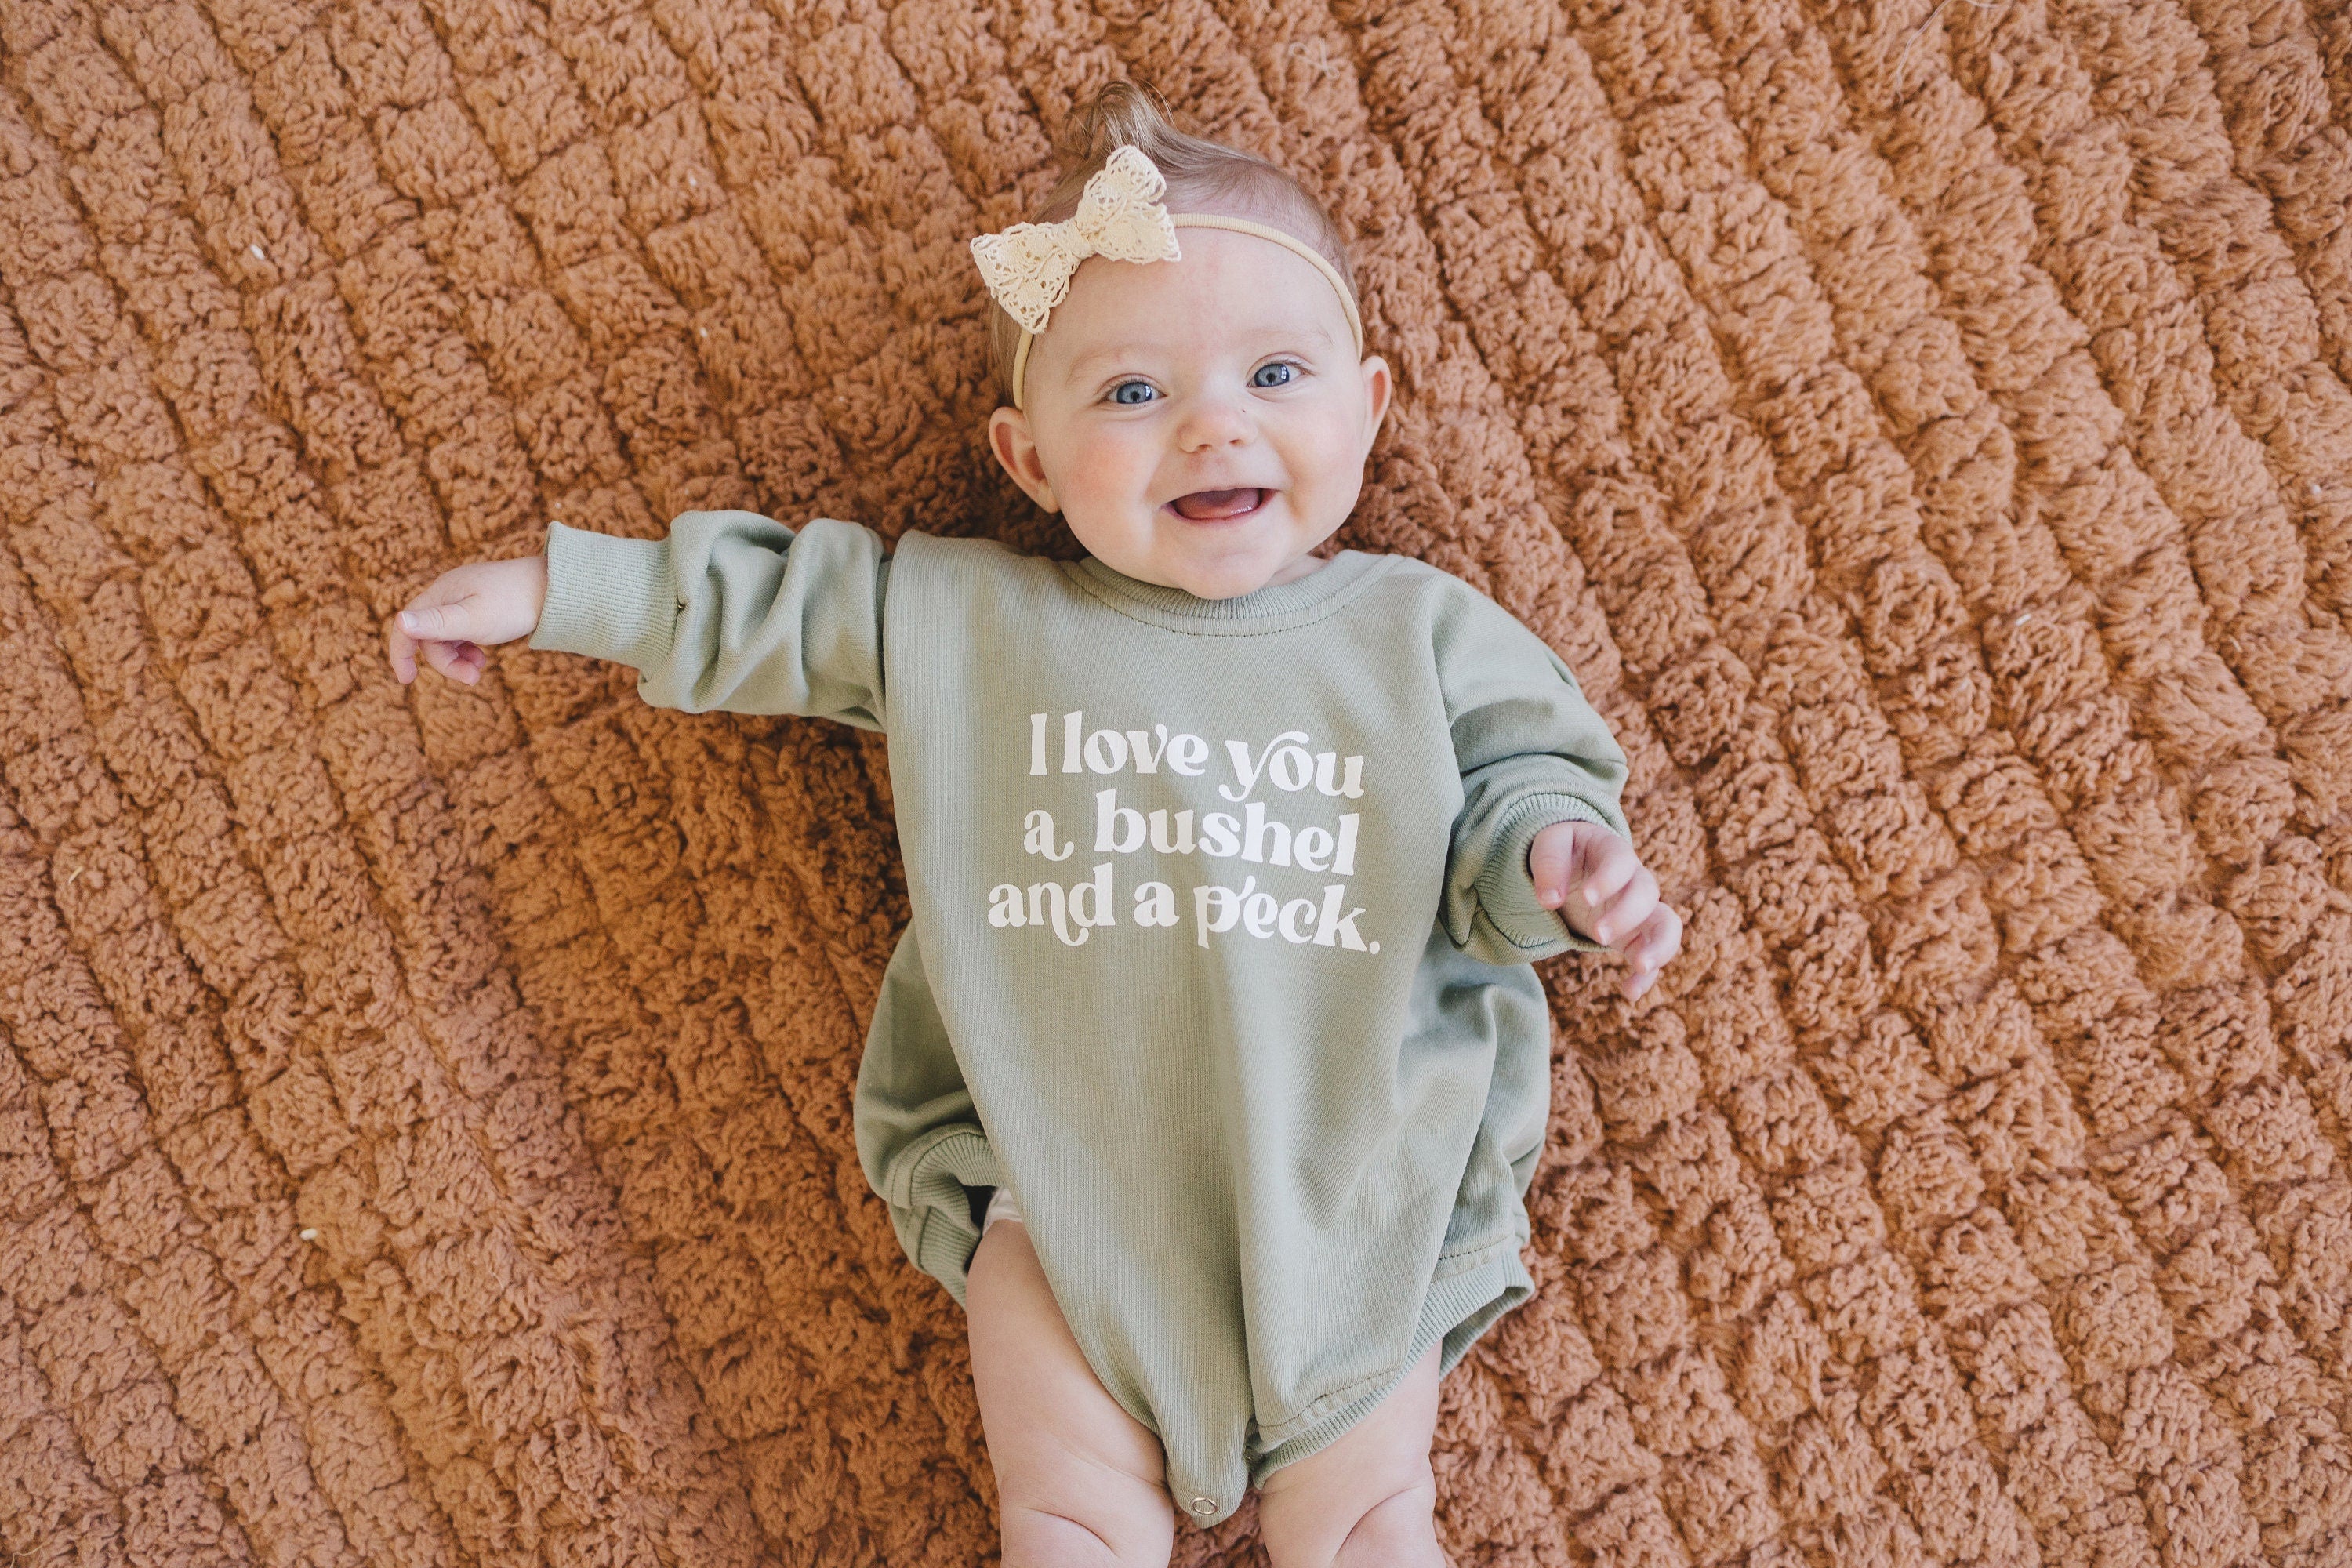 I Love You A Bushel and a Peck Oversized Sweatshirt Romper - Baby Bubble Romper - Baby Girl Outfit - Graphic Romper - Neutral Baby Clothes